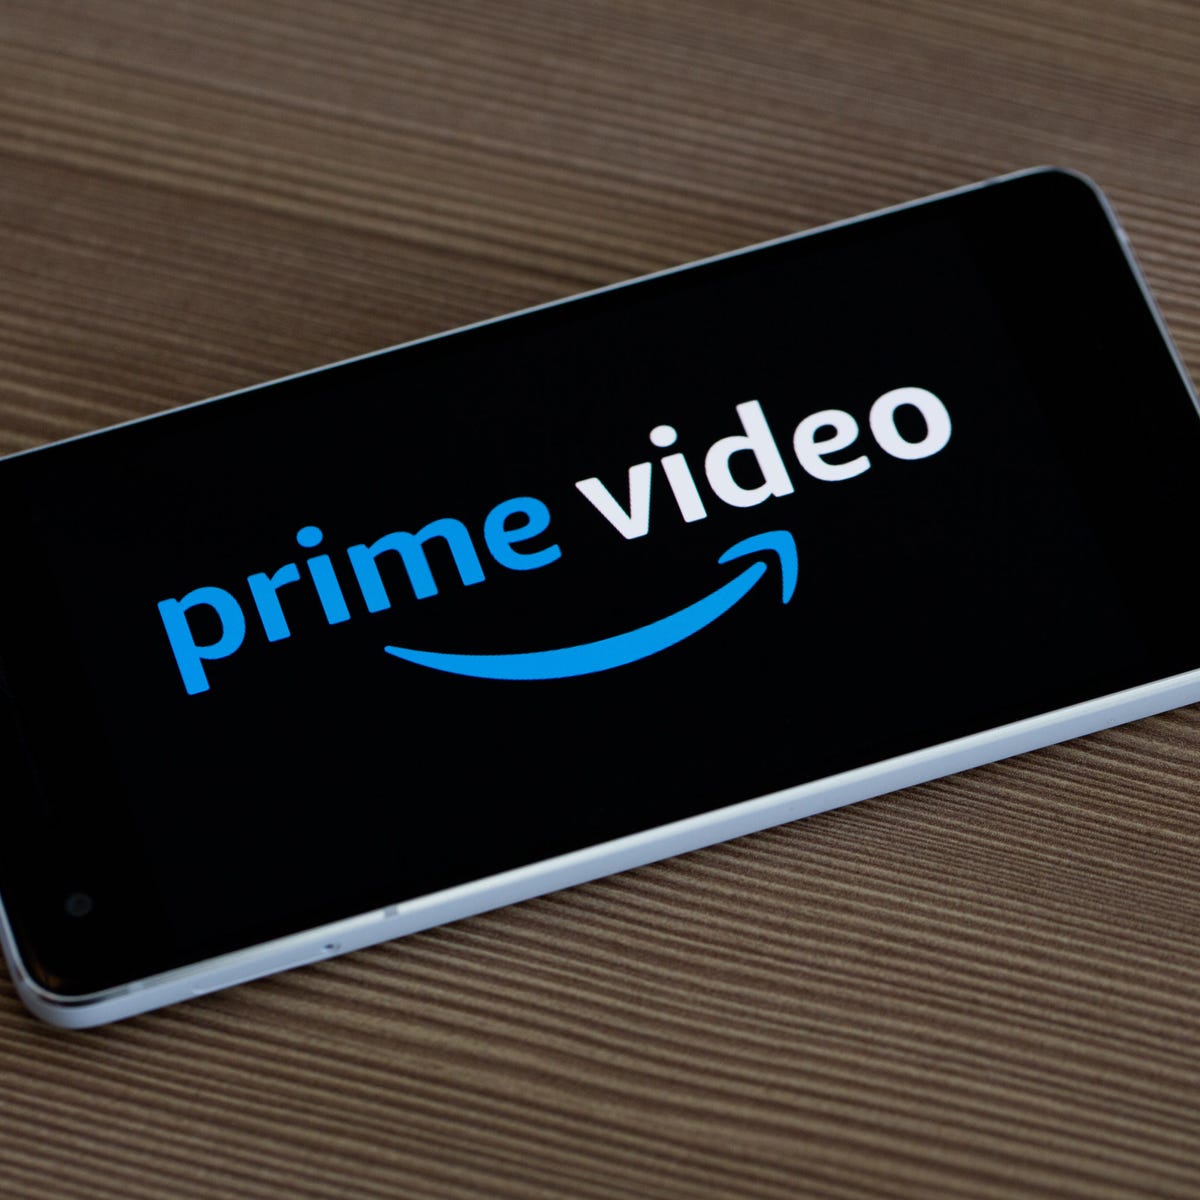 How to have an  Prime watch party with up to 100 friends - CNET